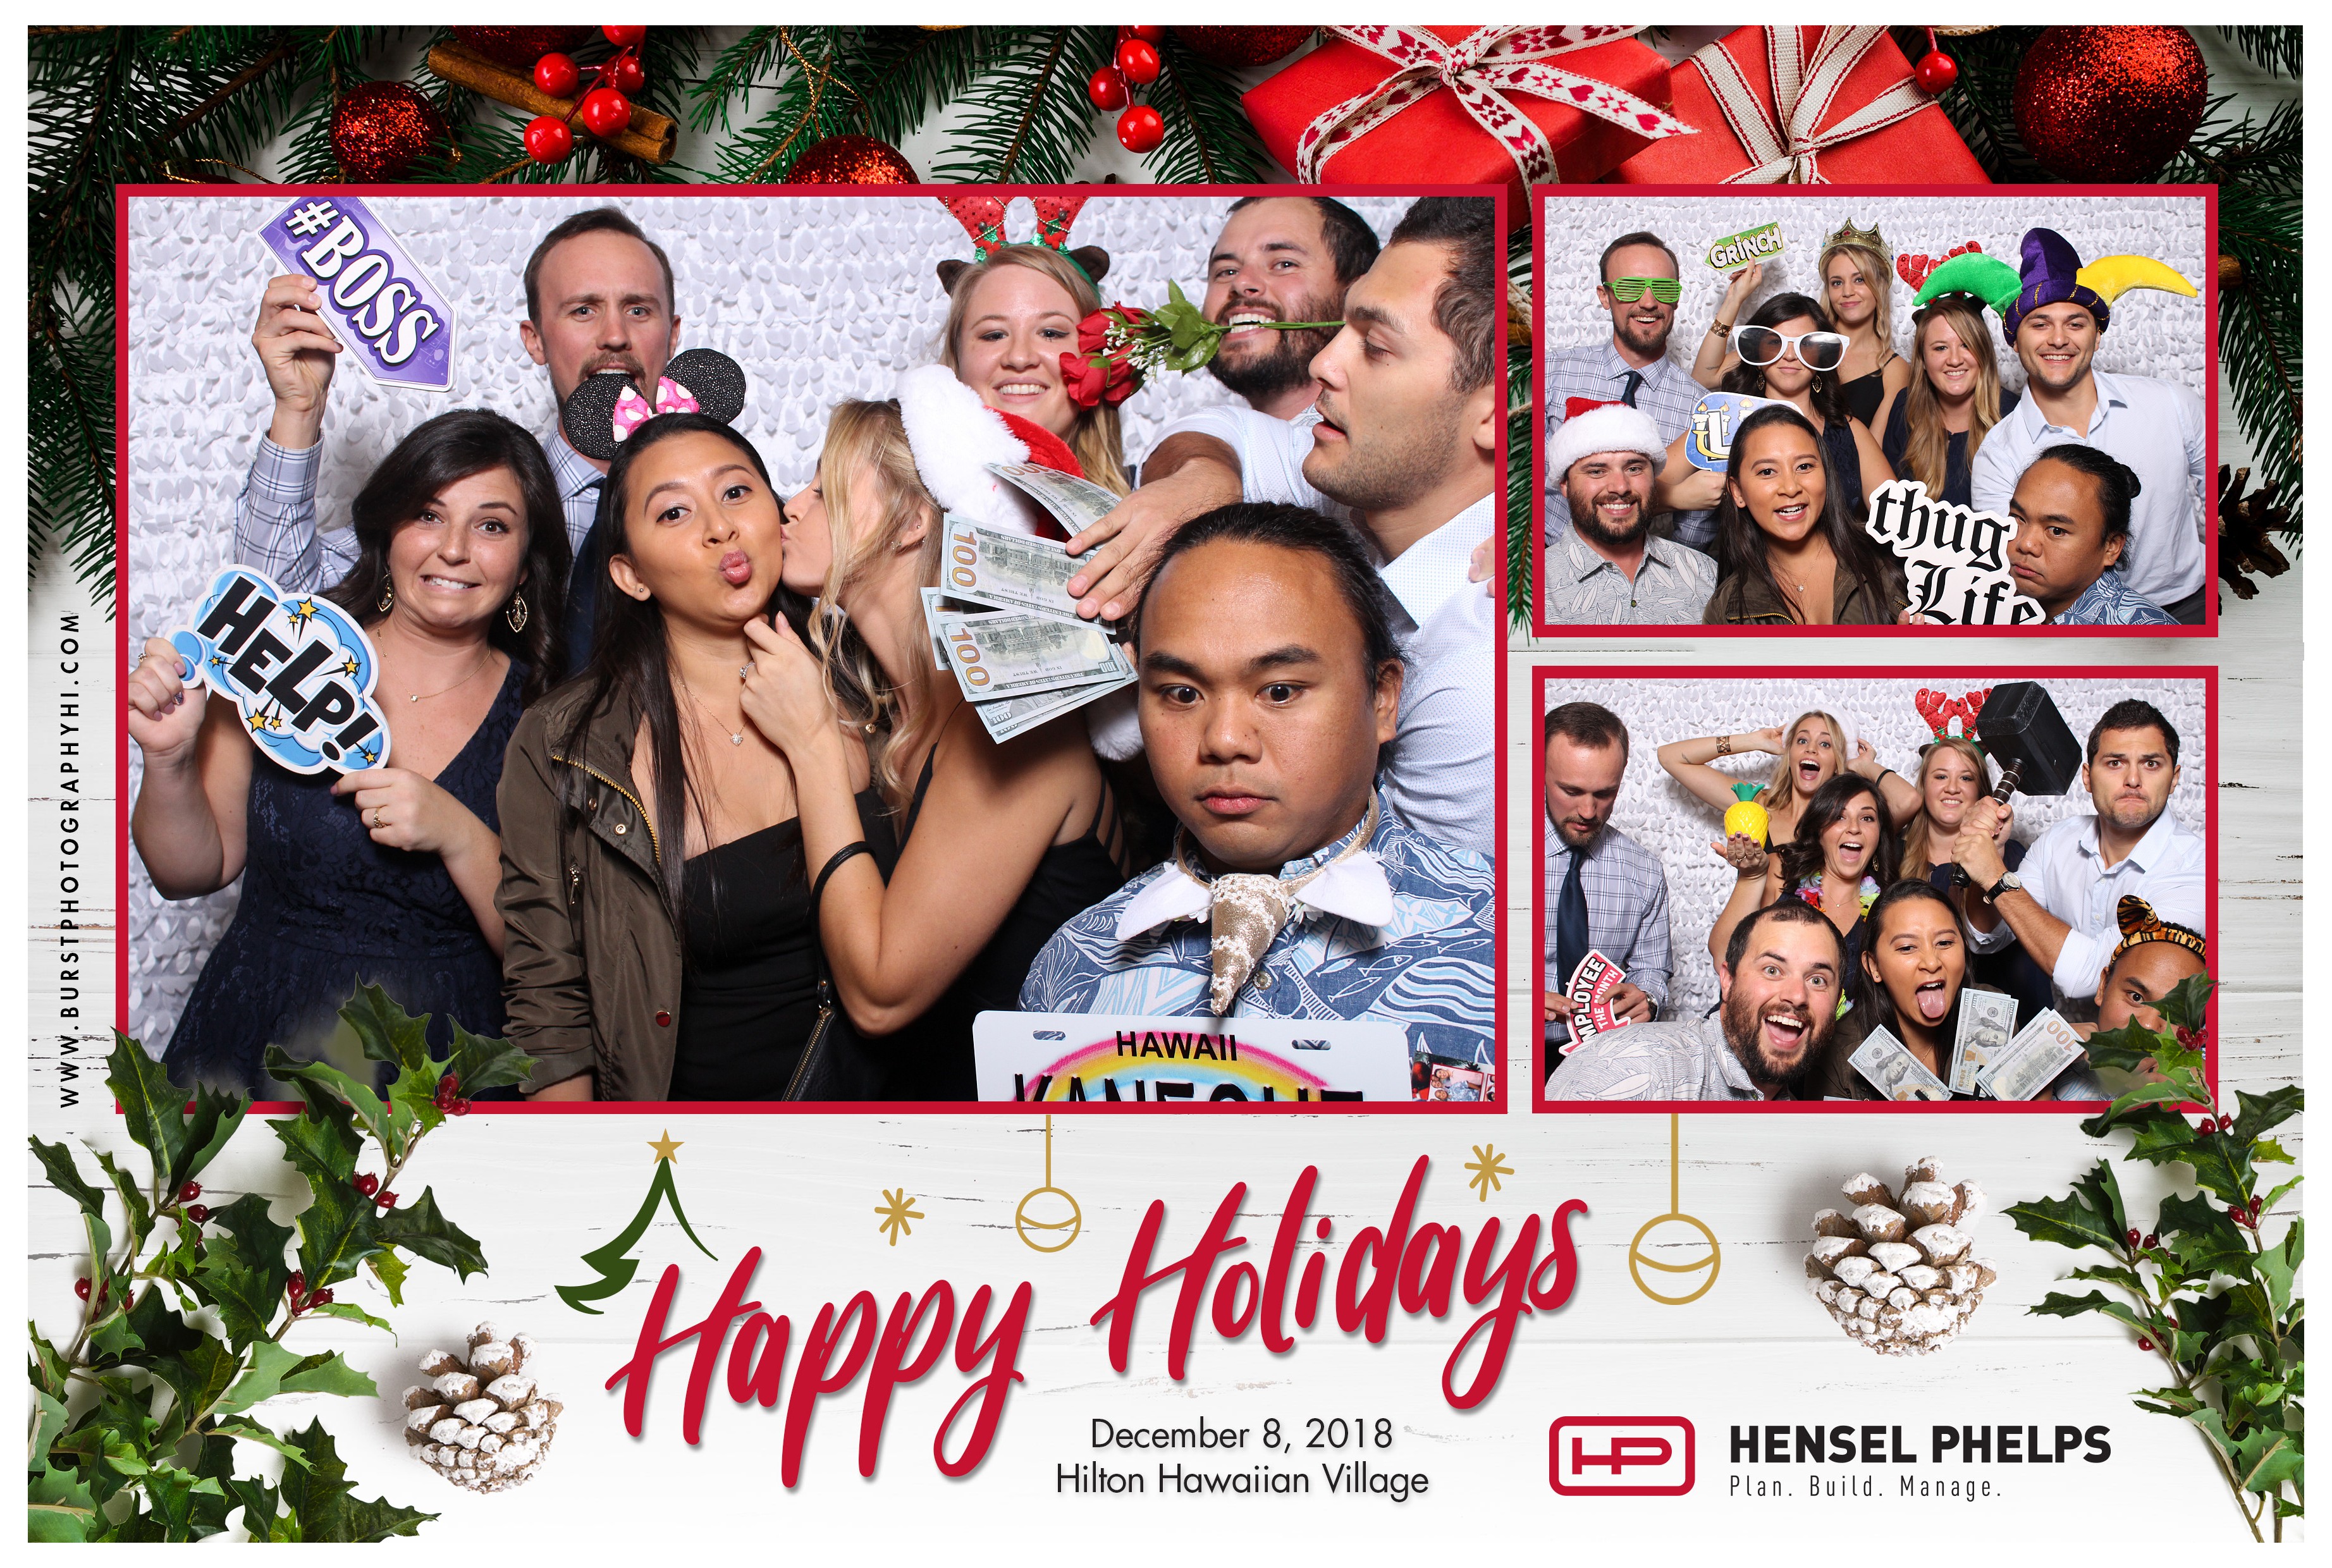 Hensel Phelps Company Holiday Party Burst Photography and Design